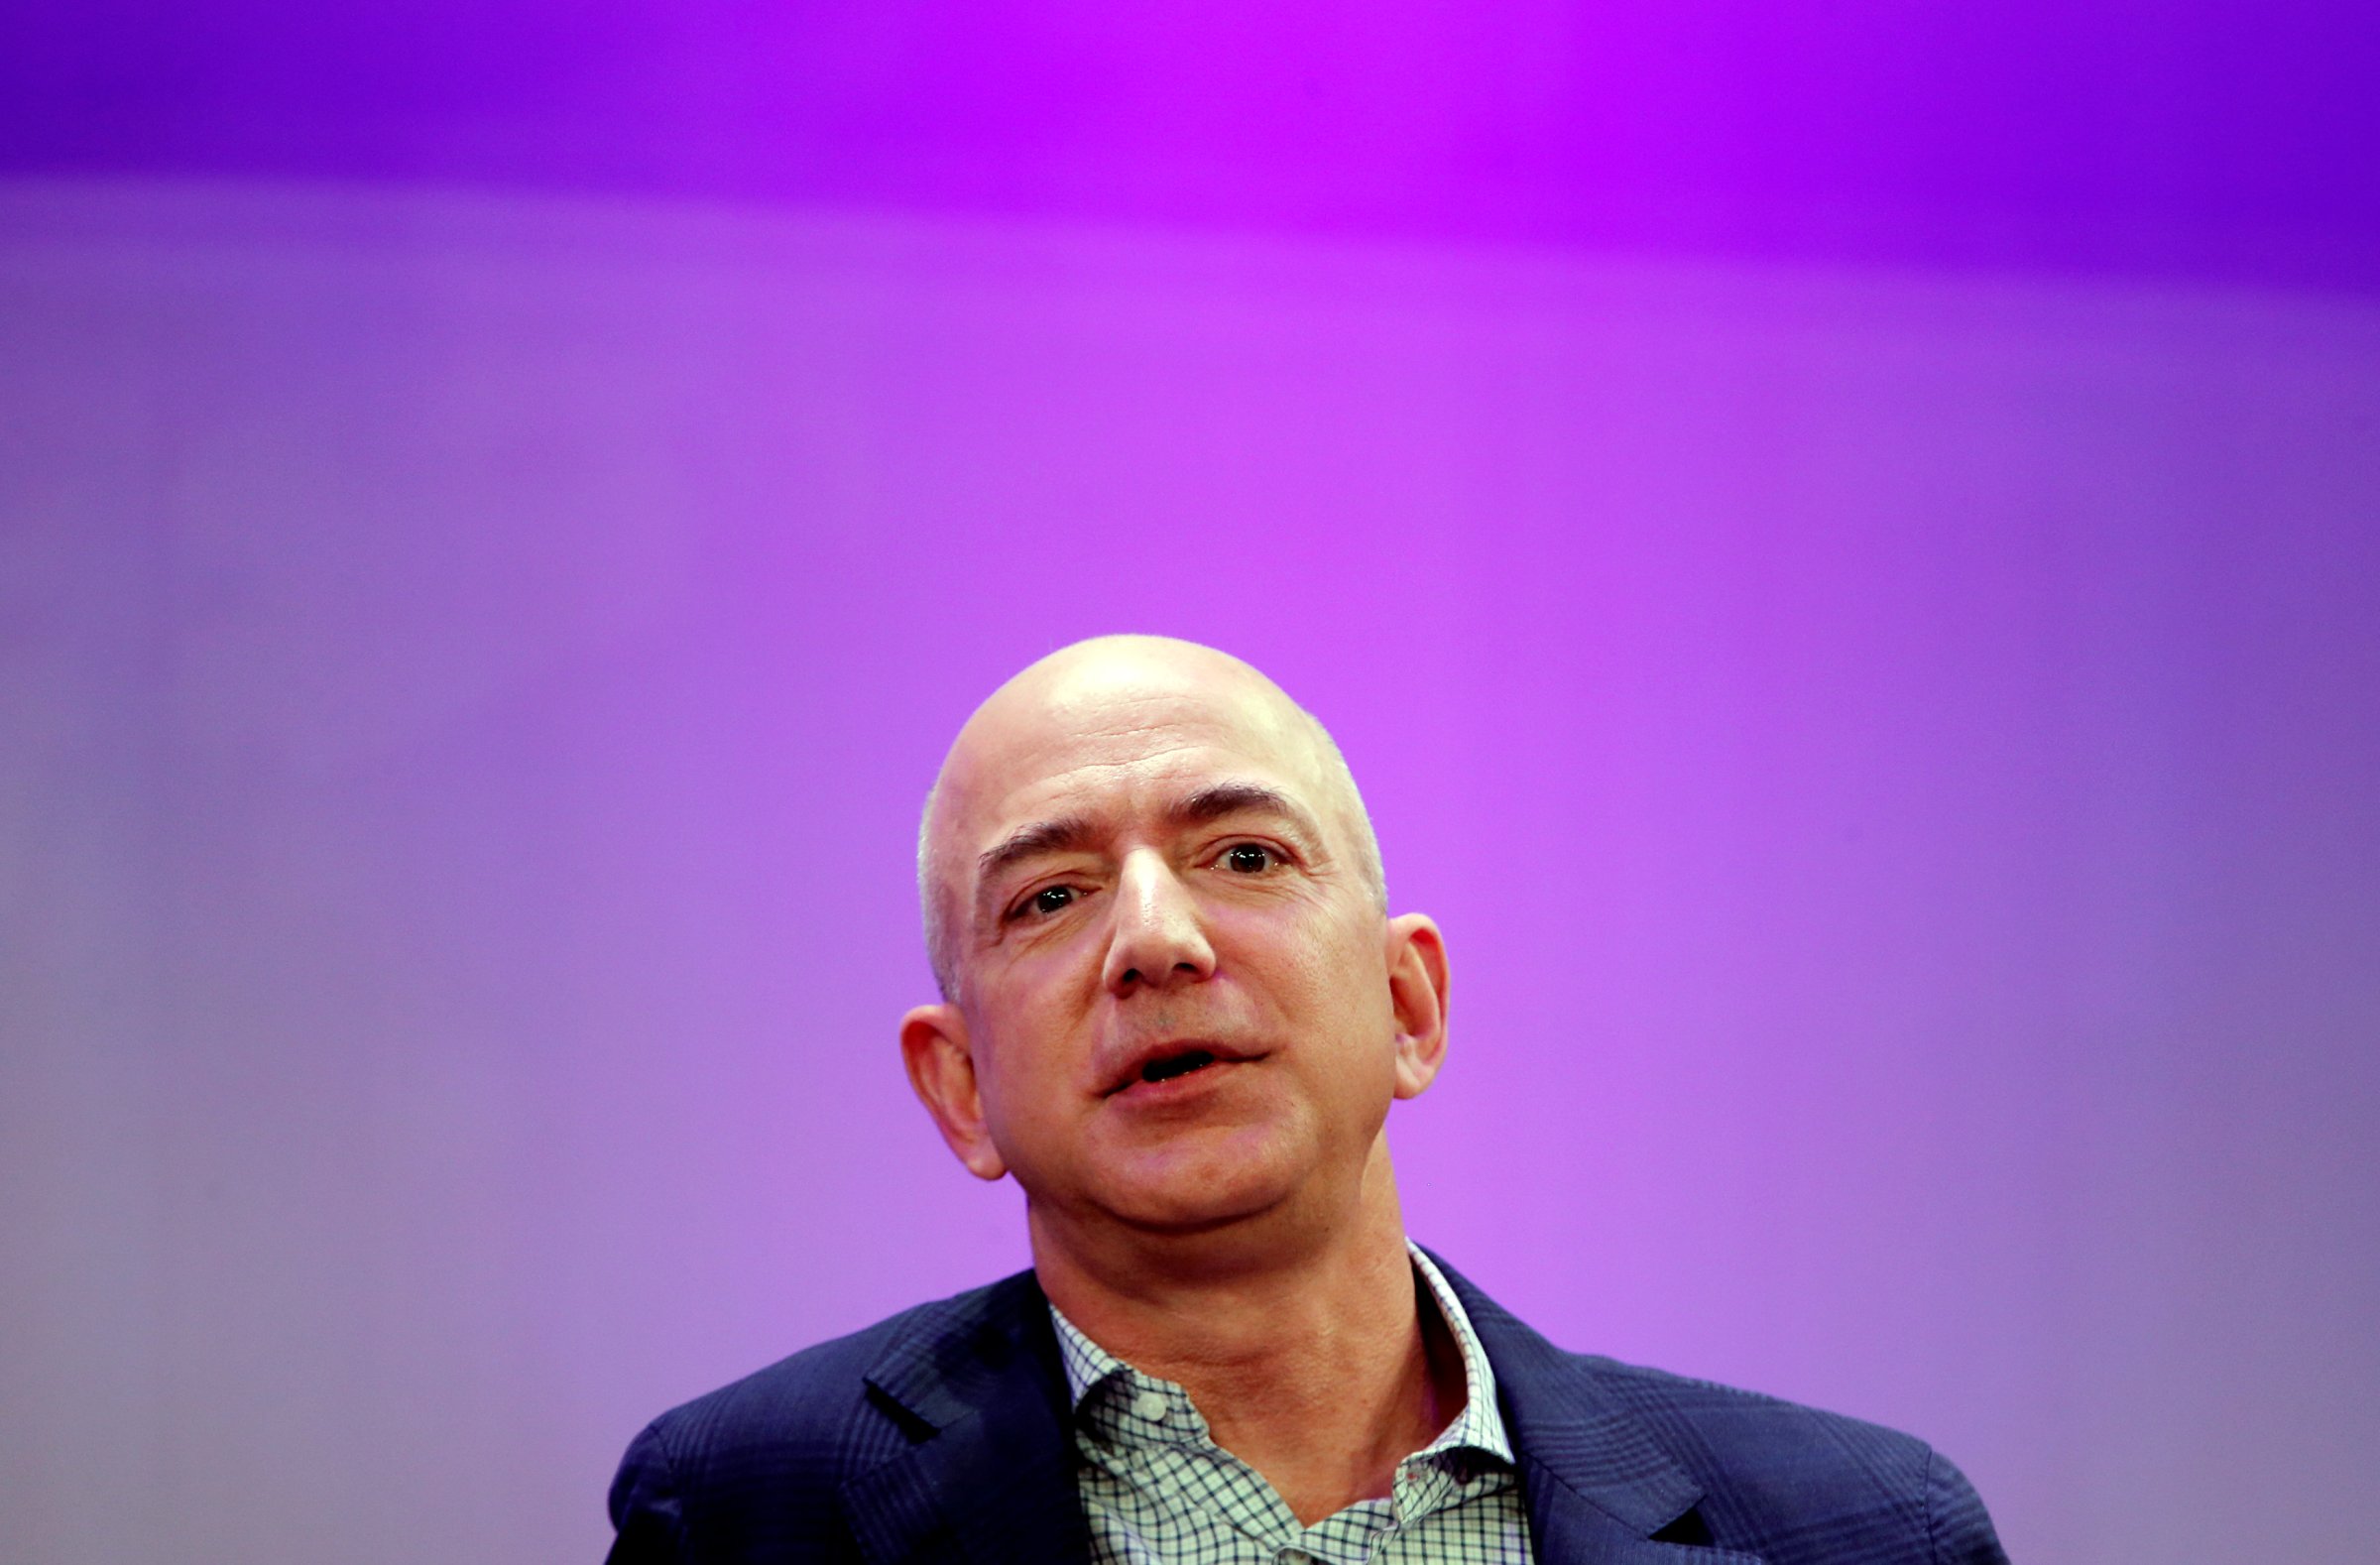 Amazon President, Chairman and CEO Jeff Bezos speaks at the Business Insider's "Ignition Future of Digital" conference in New York City on Dec. 2, 2014.